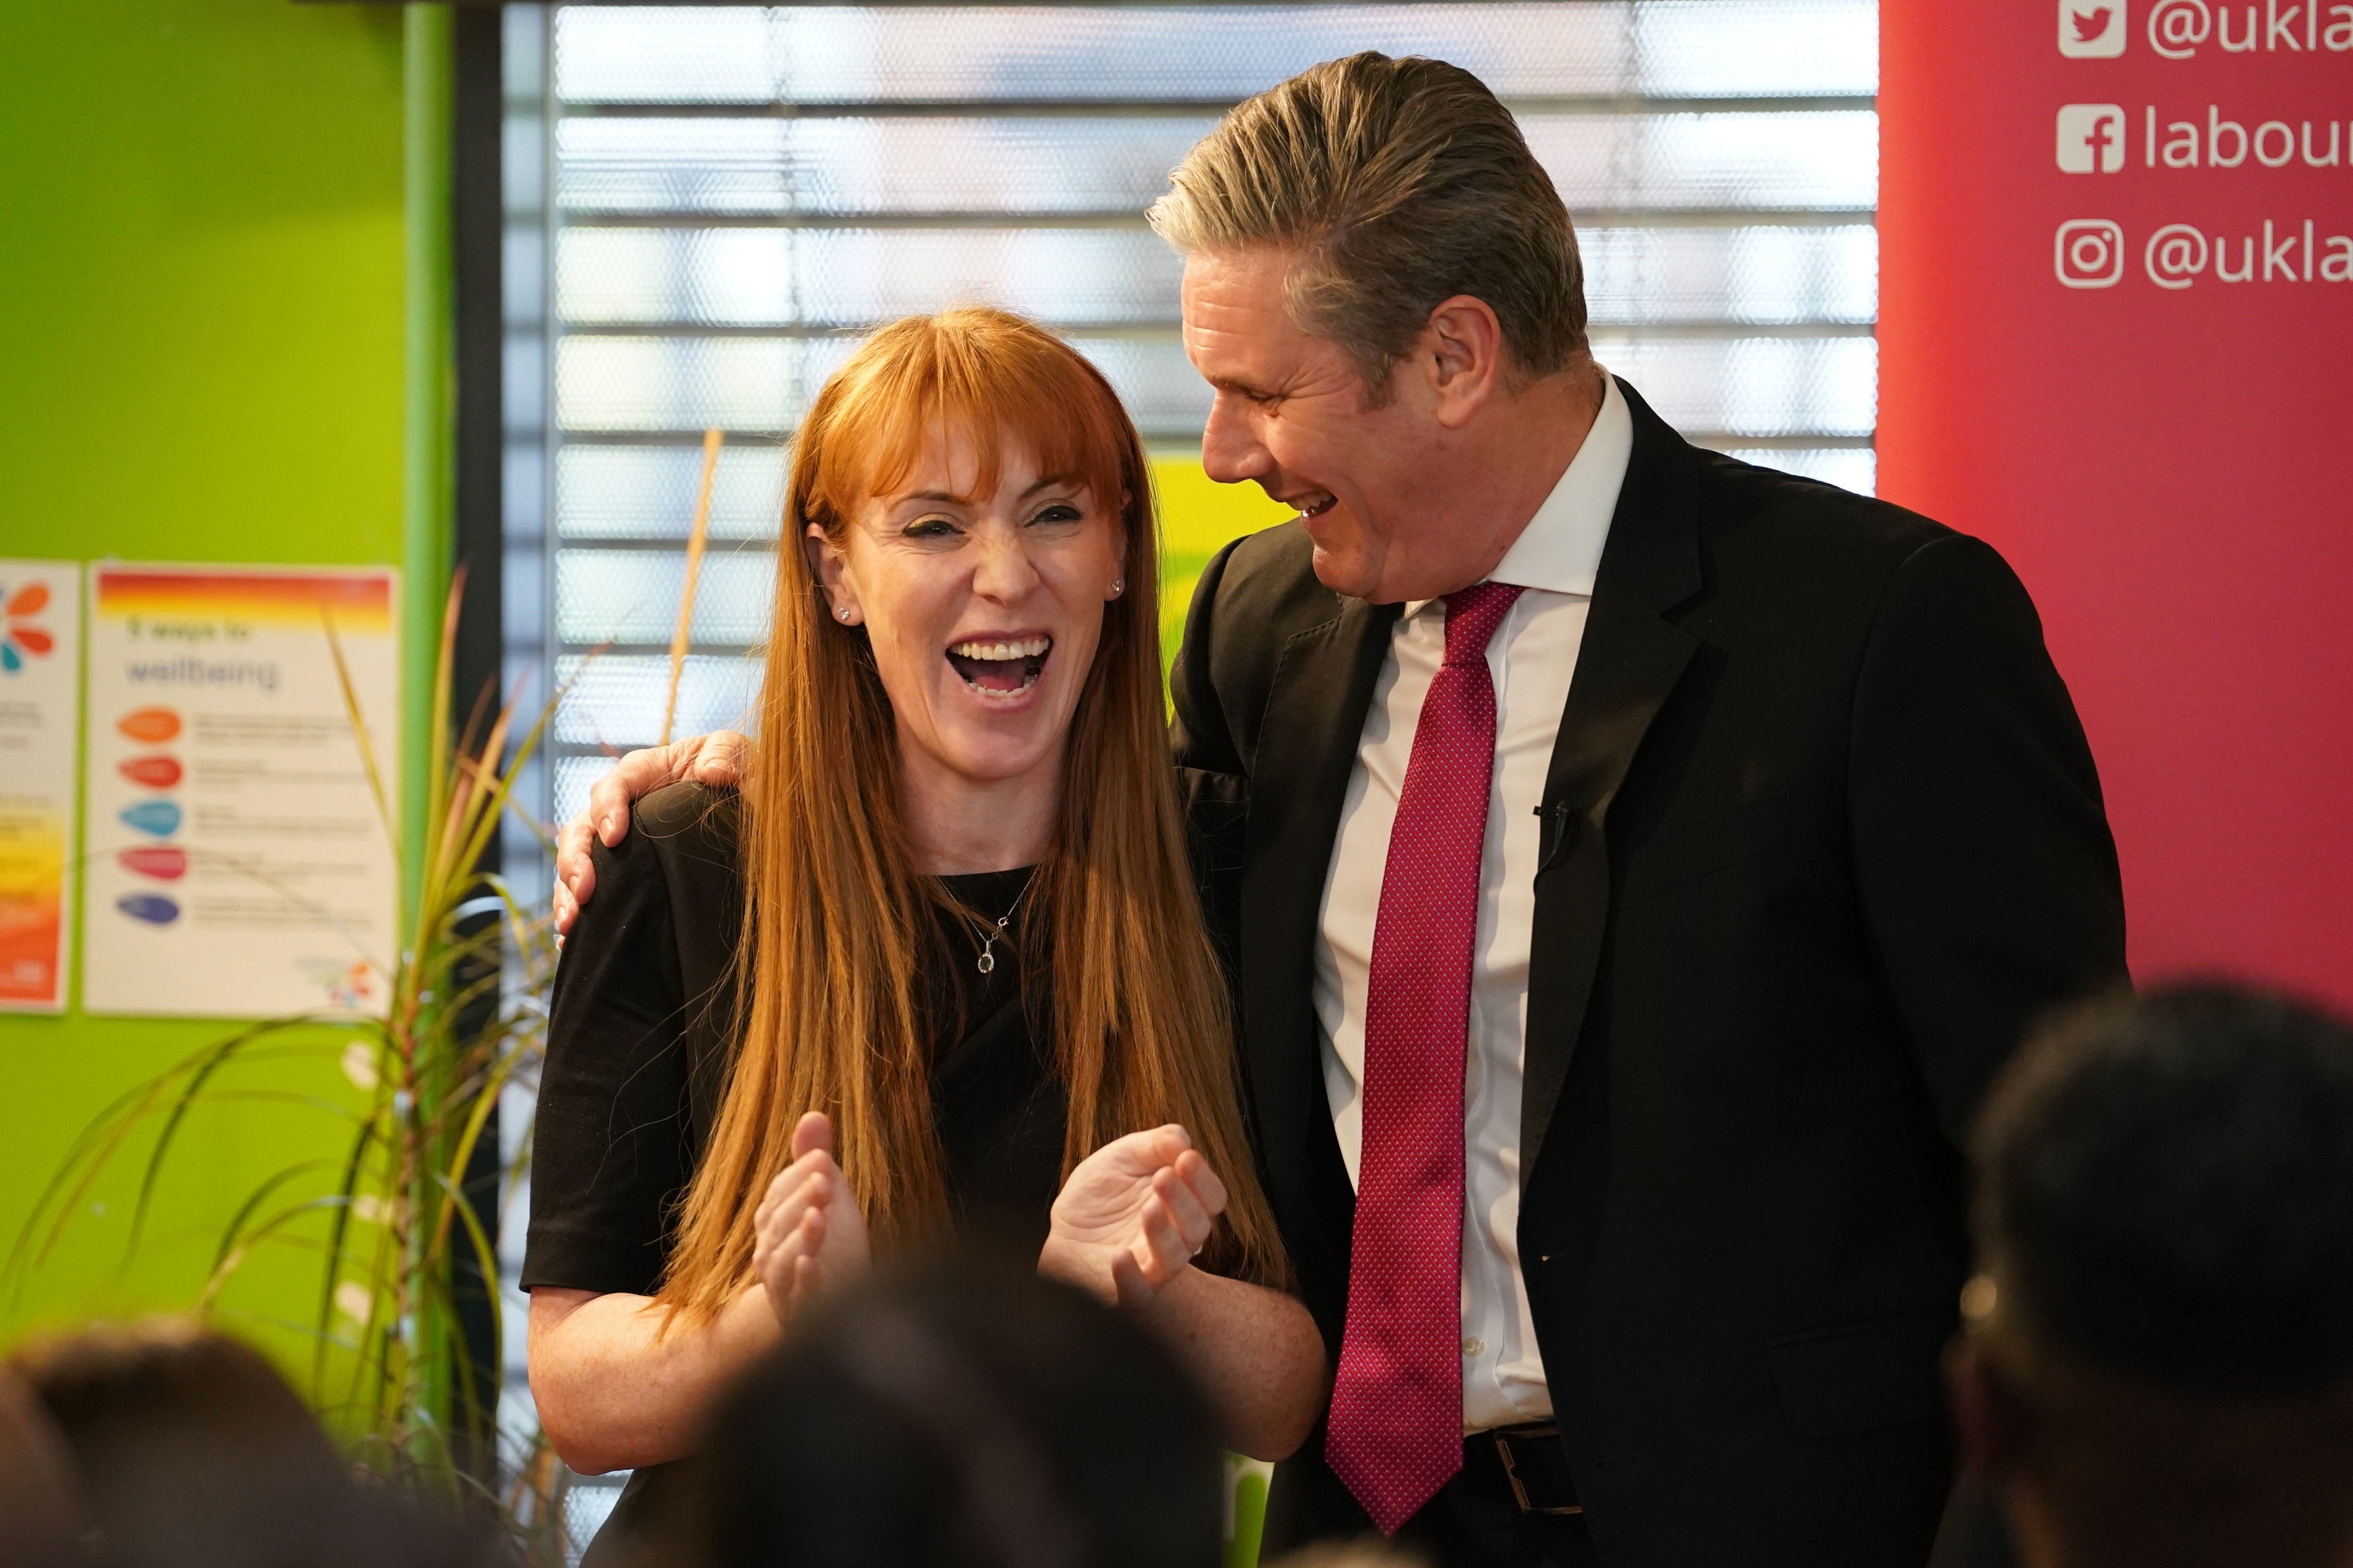 Labour leader Sir Keir Starmer with deputy leader Angela Rayner, during their visit to Gillingham, Kent, on the eve of local elections polling day to outline Labour's plan to tackle the cost of living crisis